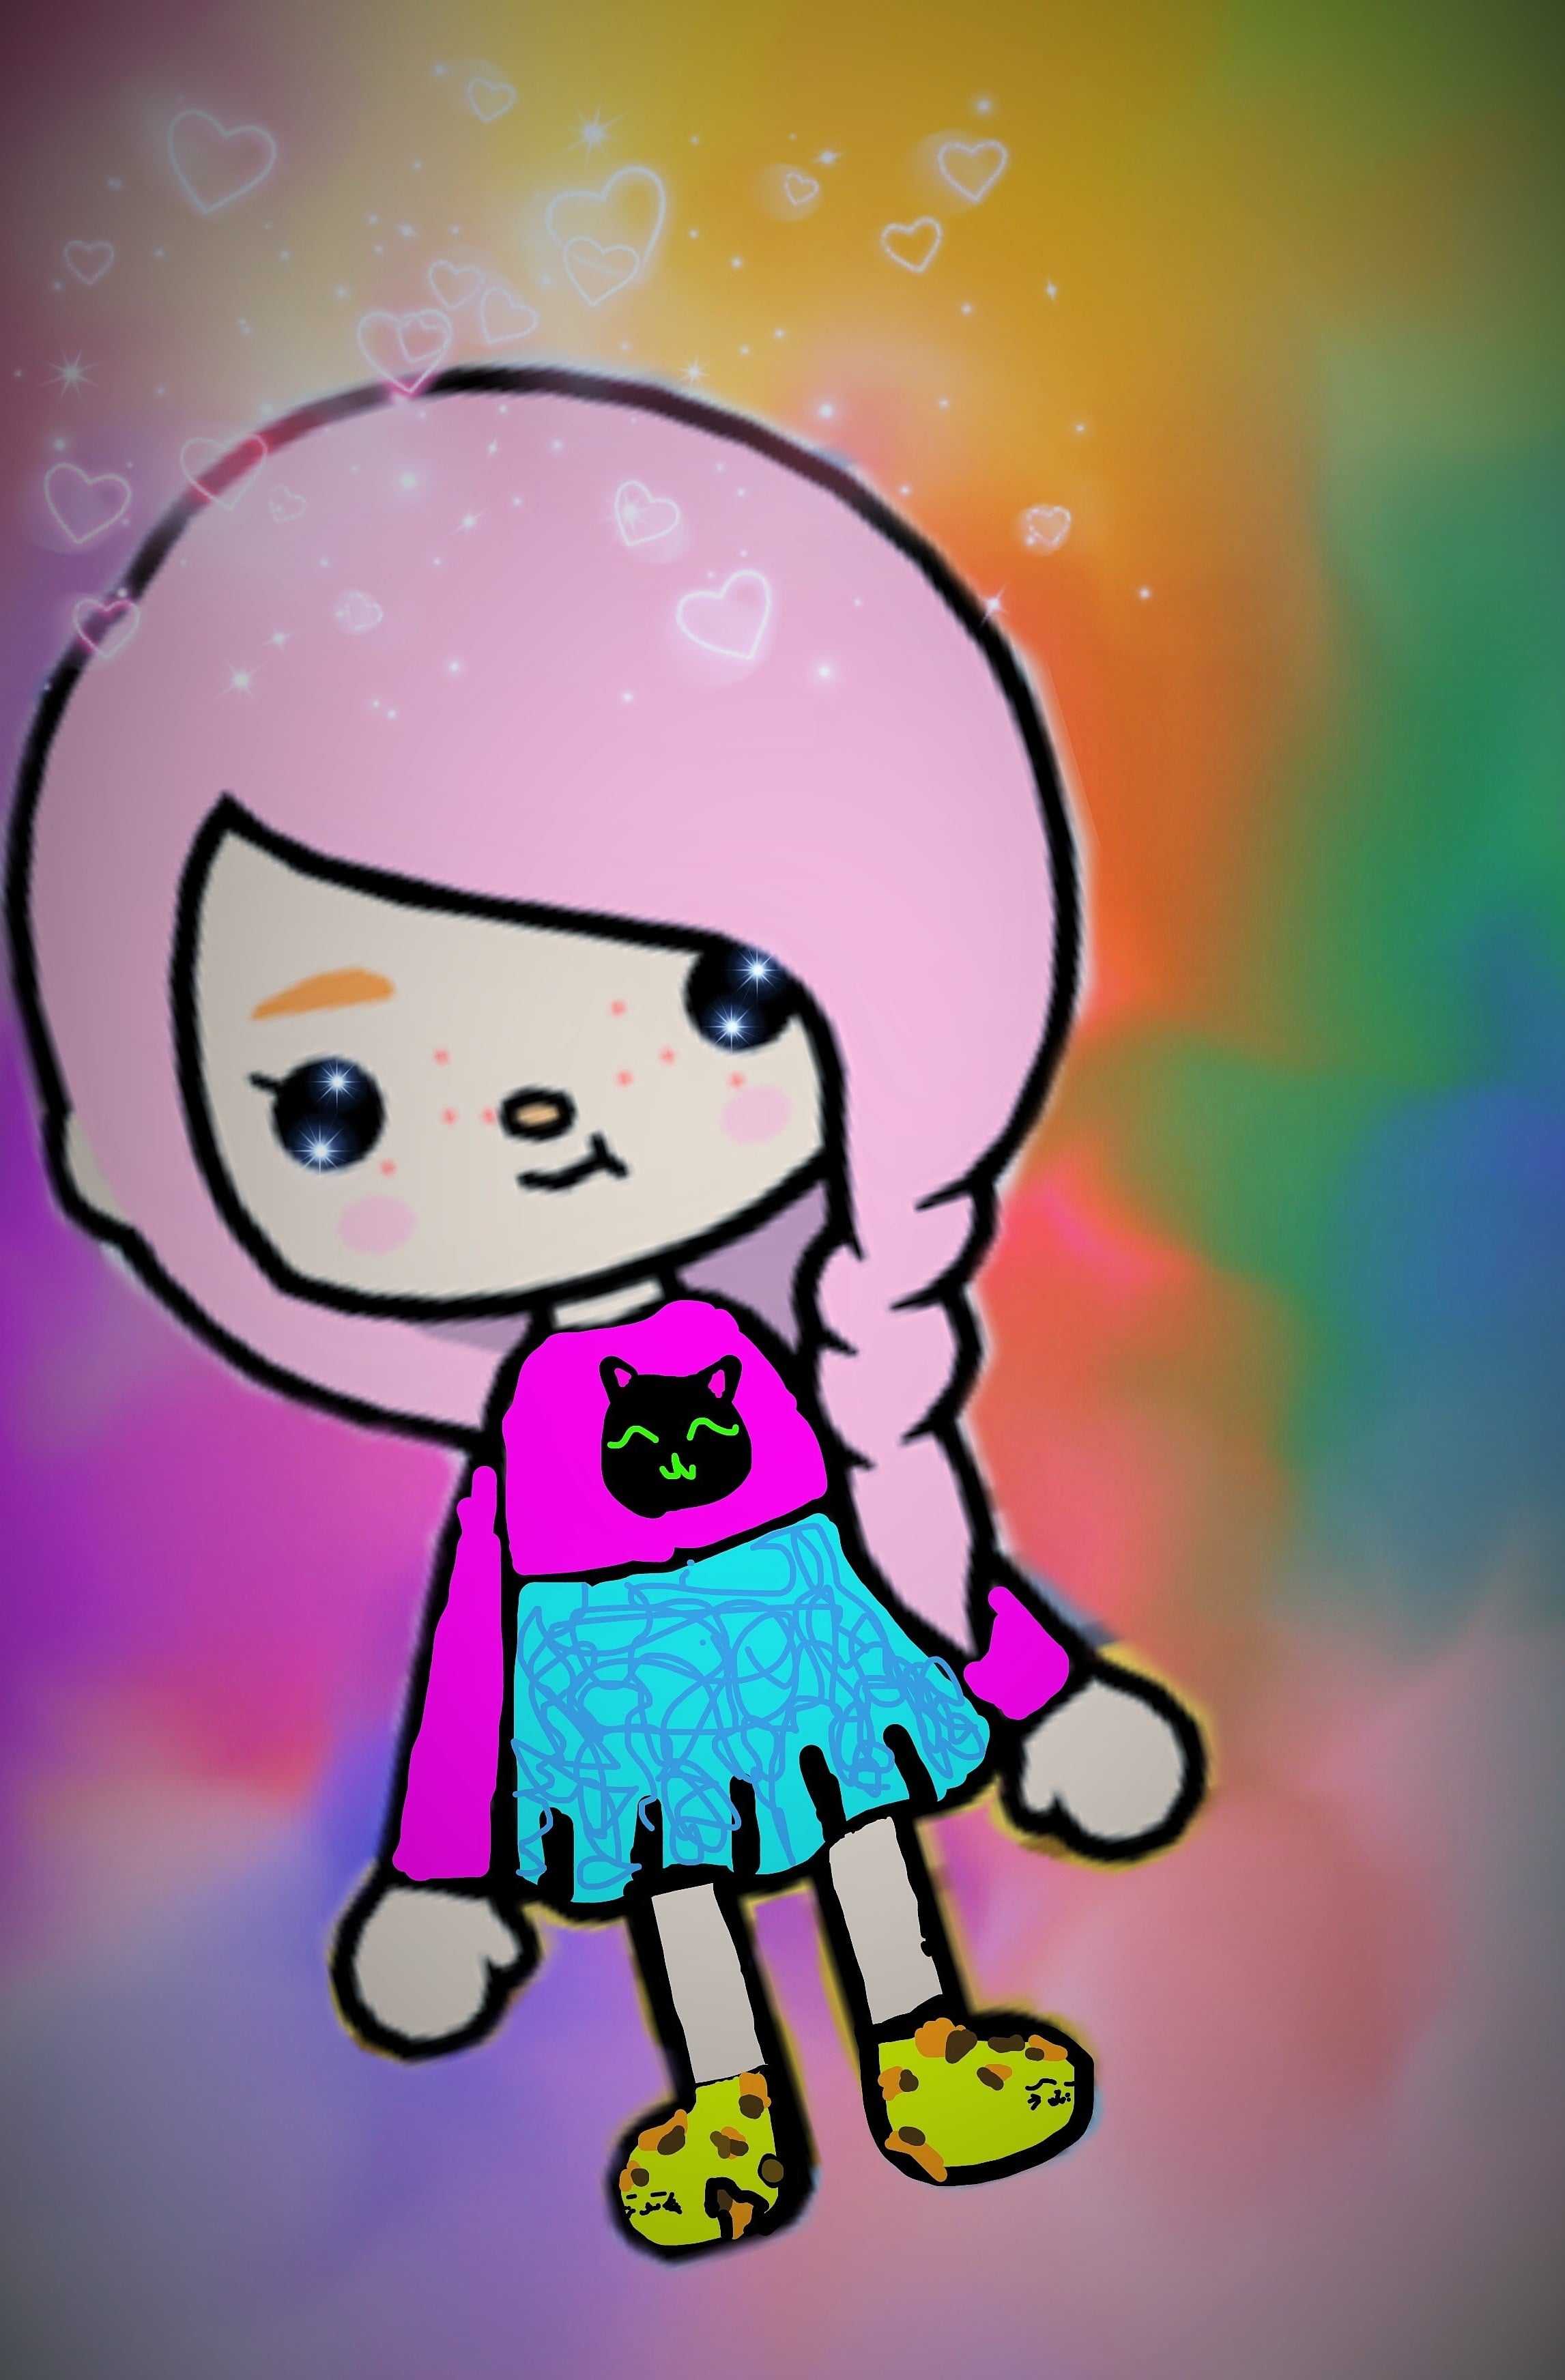 A digital drawing of a pink haired girl with a black cat on her shirt. - Toca Boca